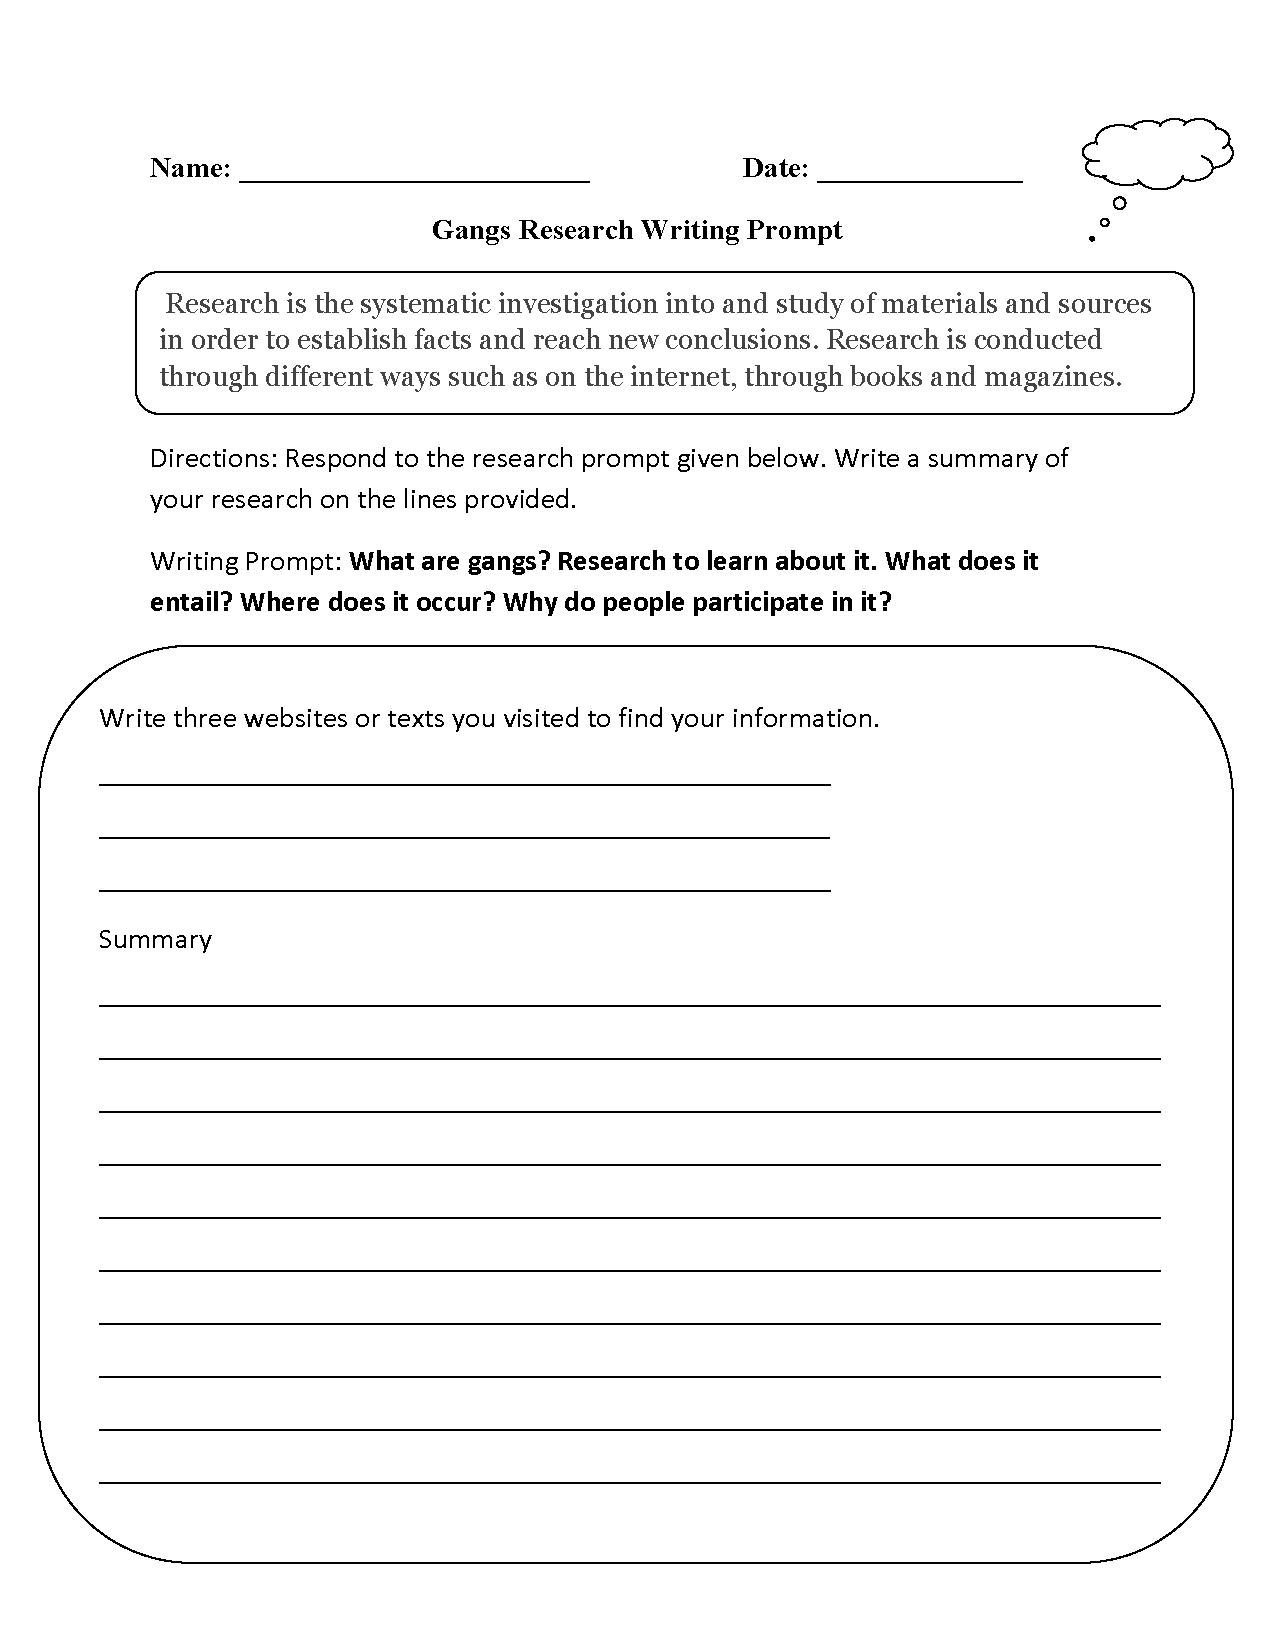 Gangs Research Writing Prompts Worksheets